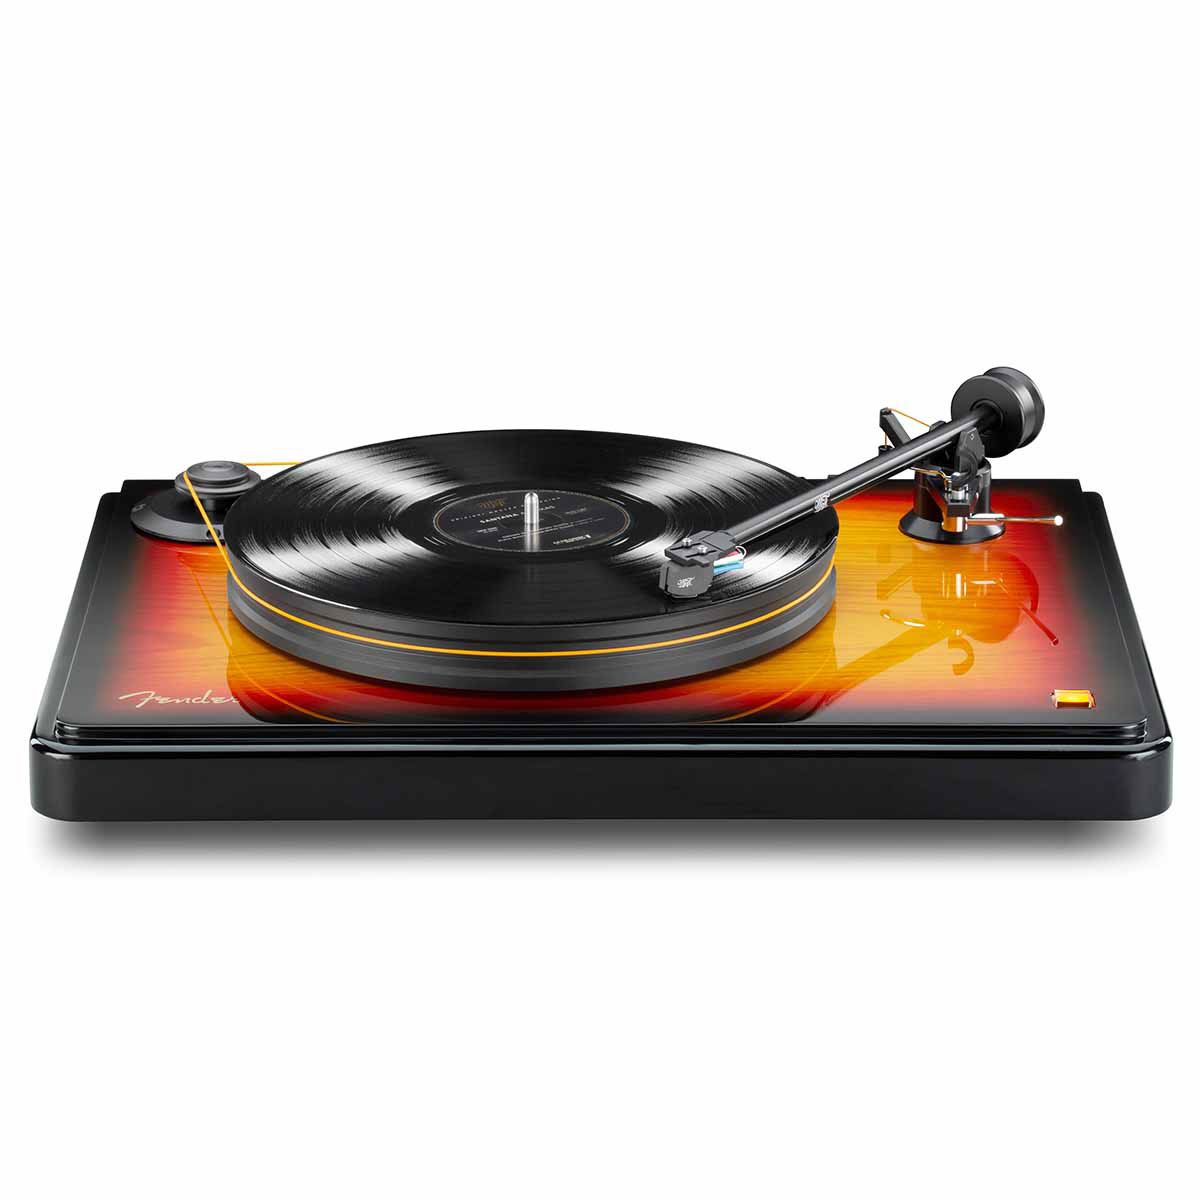 MoFi Fender PrecisionDeck Turntable, Sunburst, front view with record on turntable